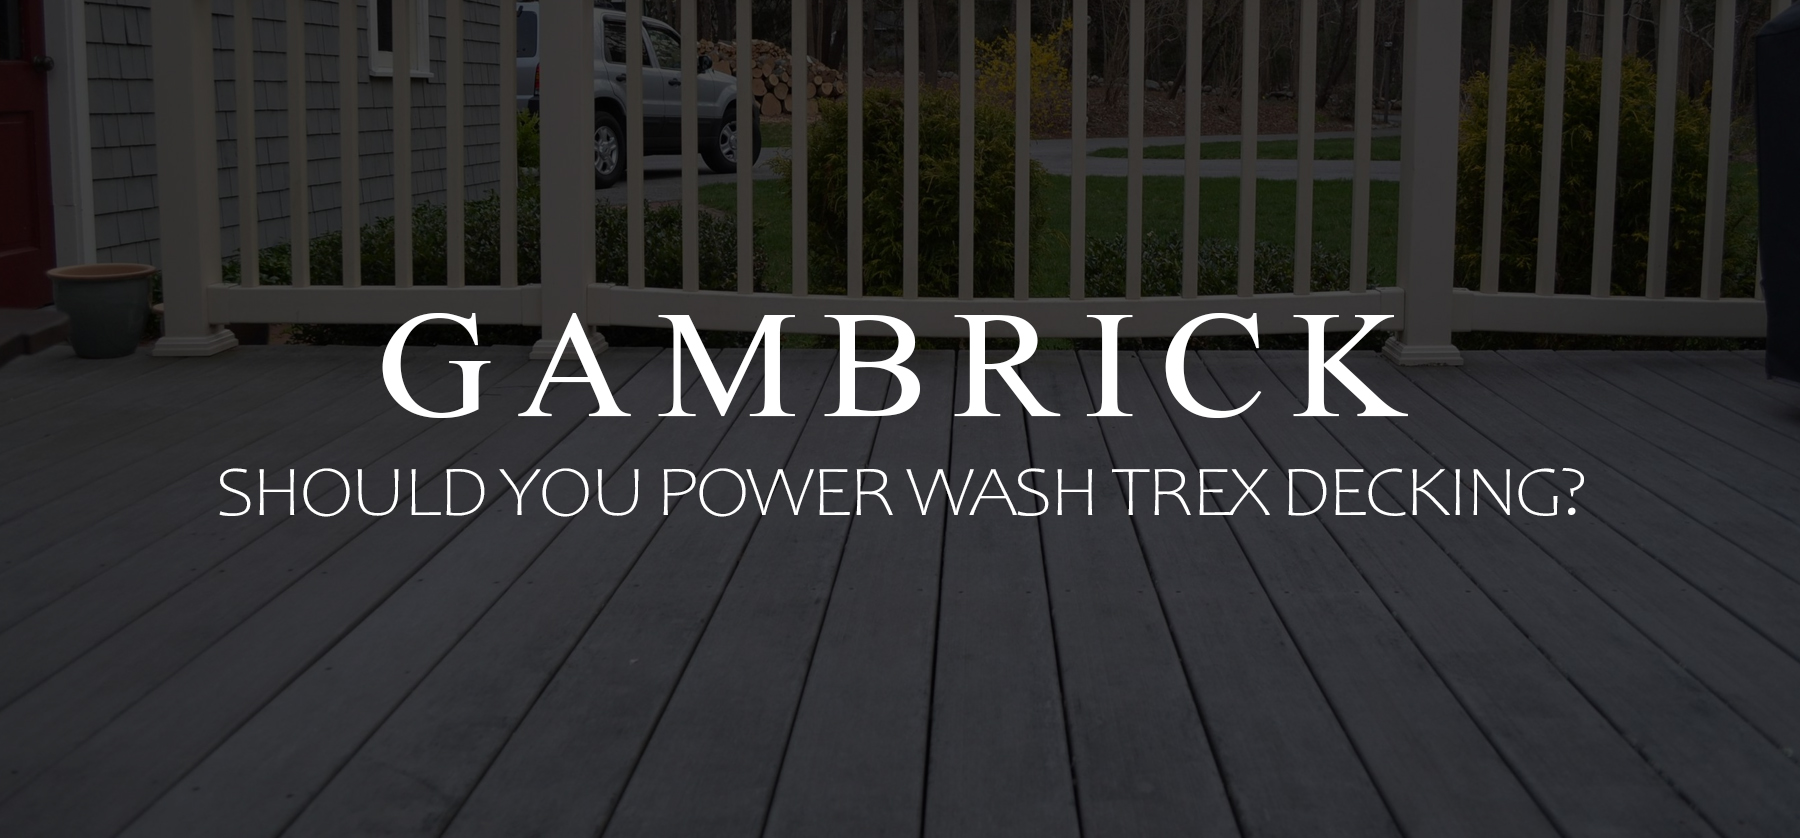 should you power wash Trex decking banner pic